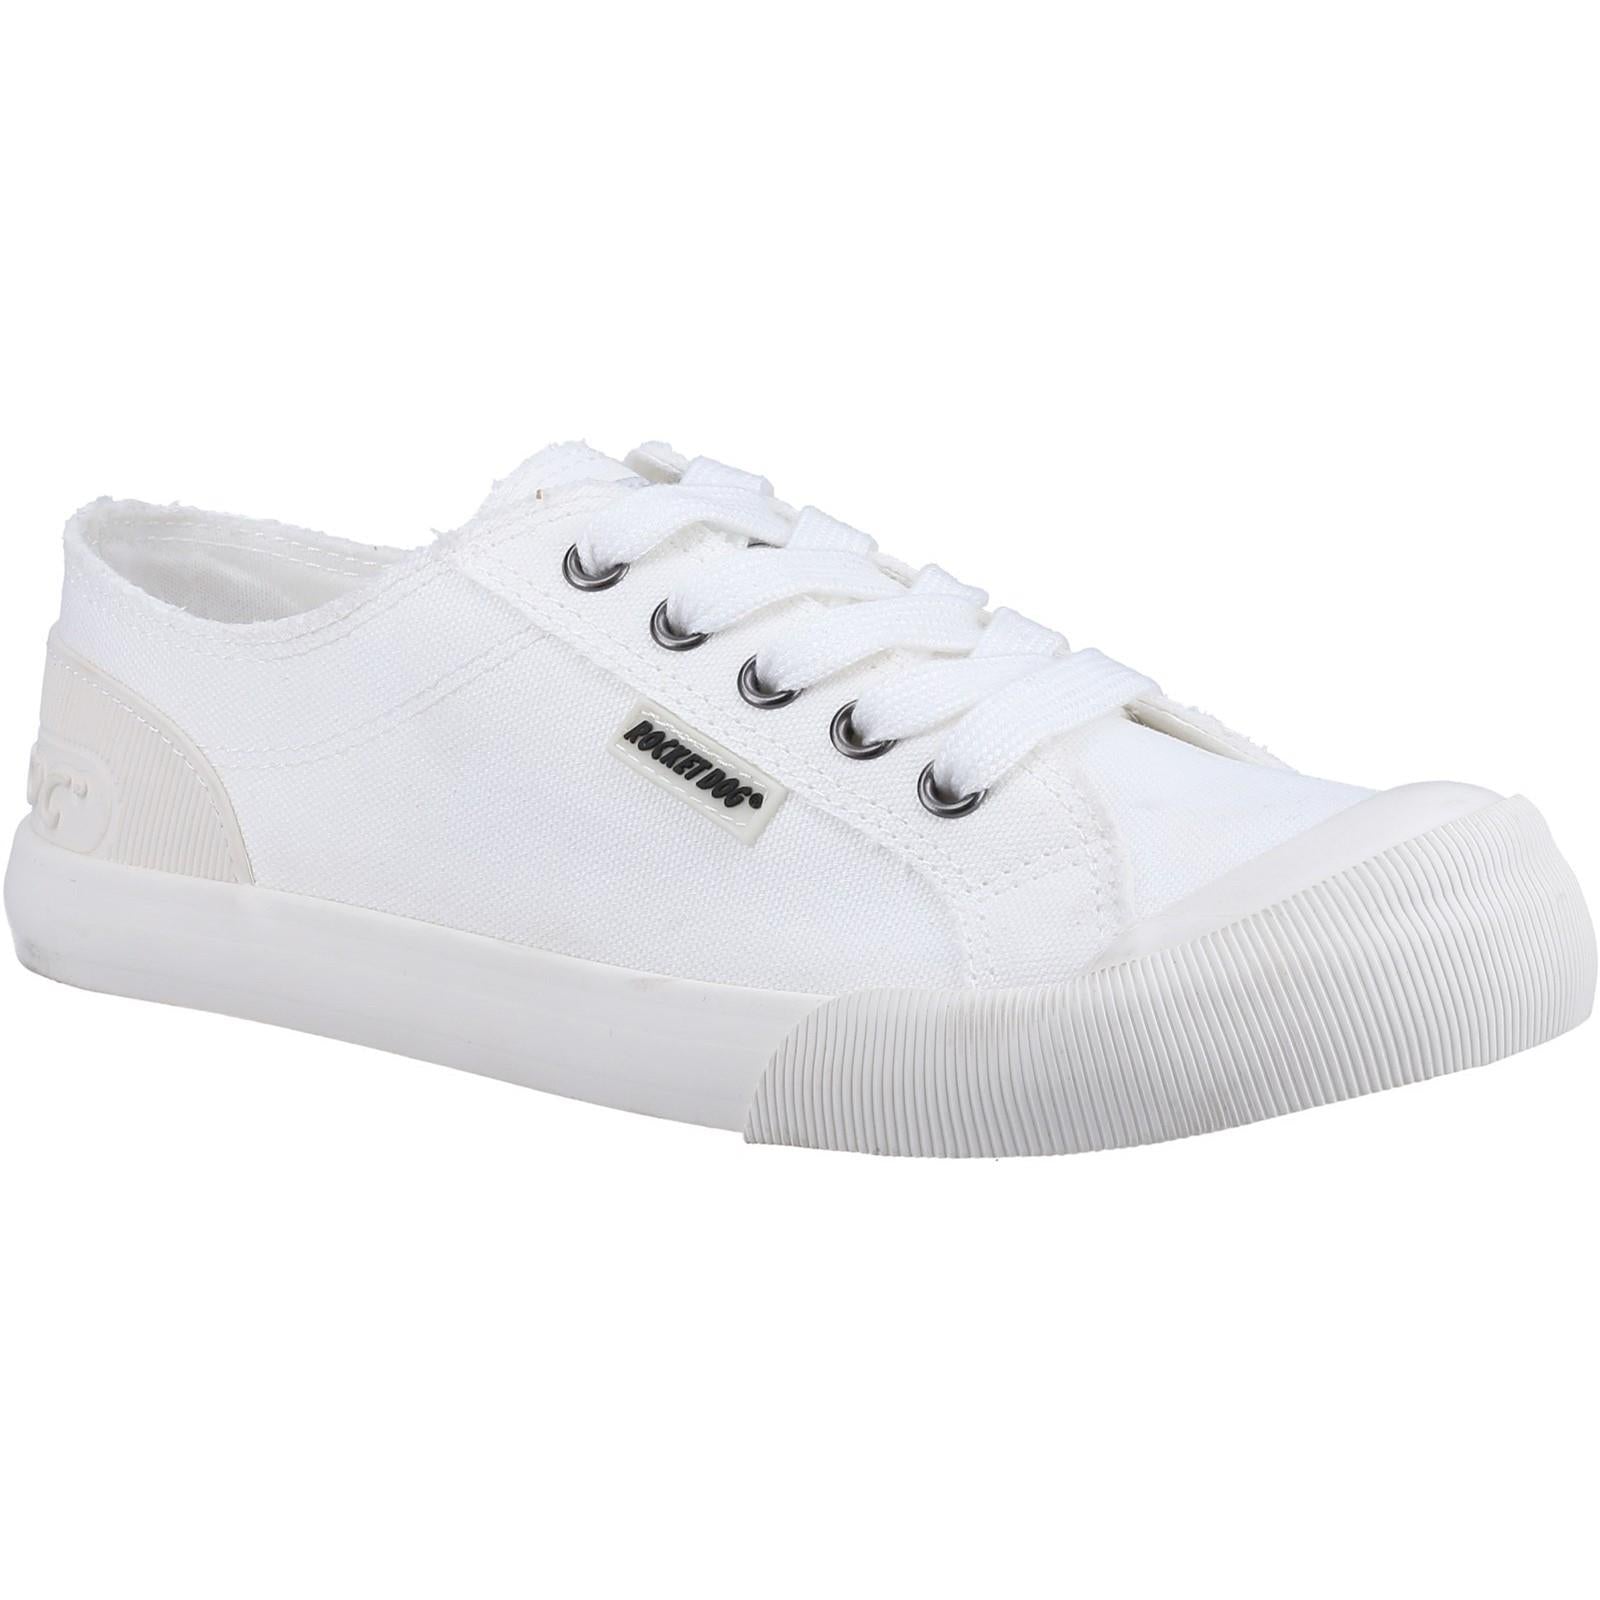 Rocket Dog Jazzin 12A Canvas ladies all white lace up plimsoll trainers shoes